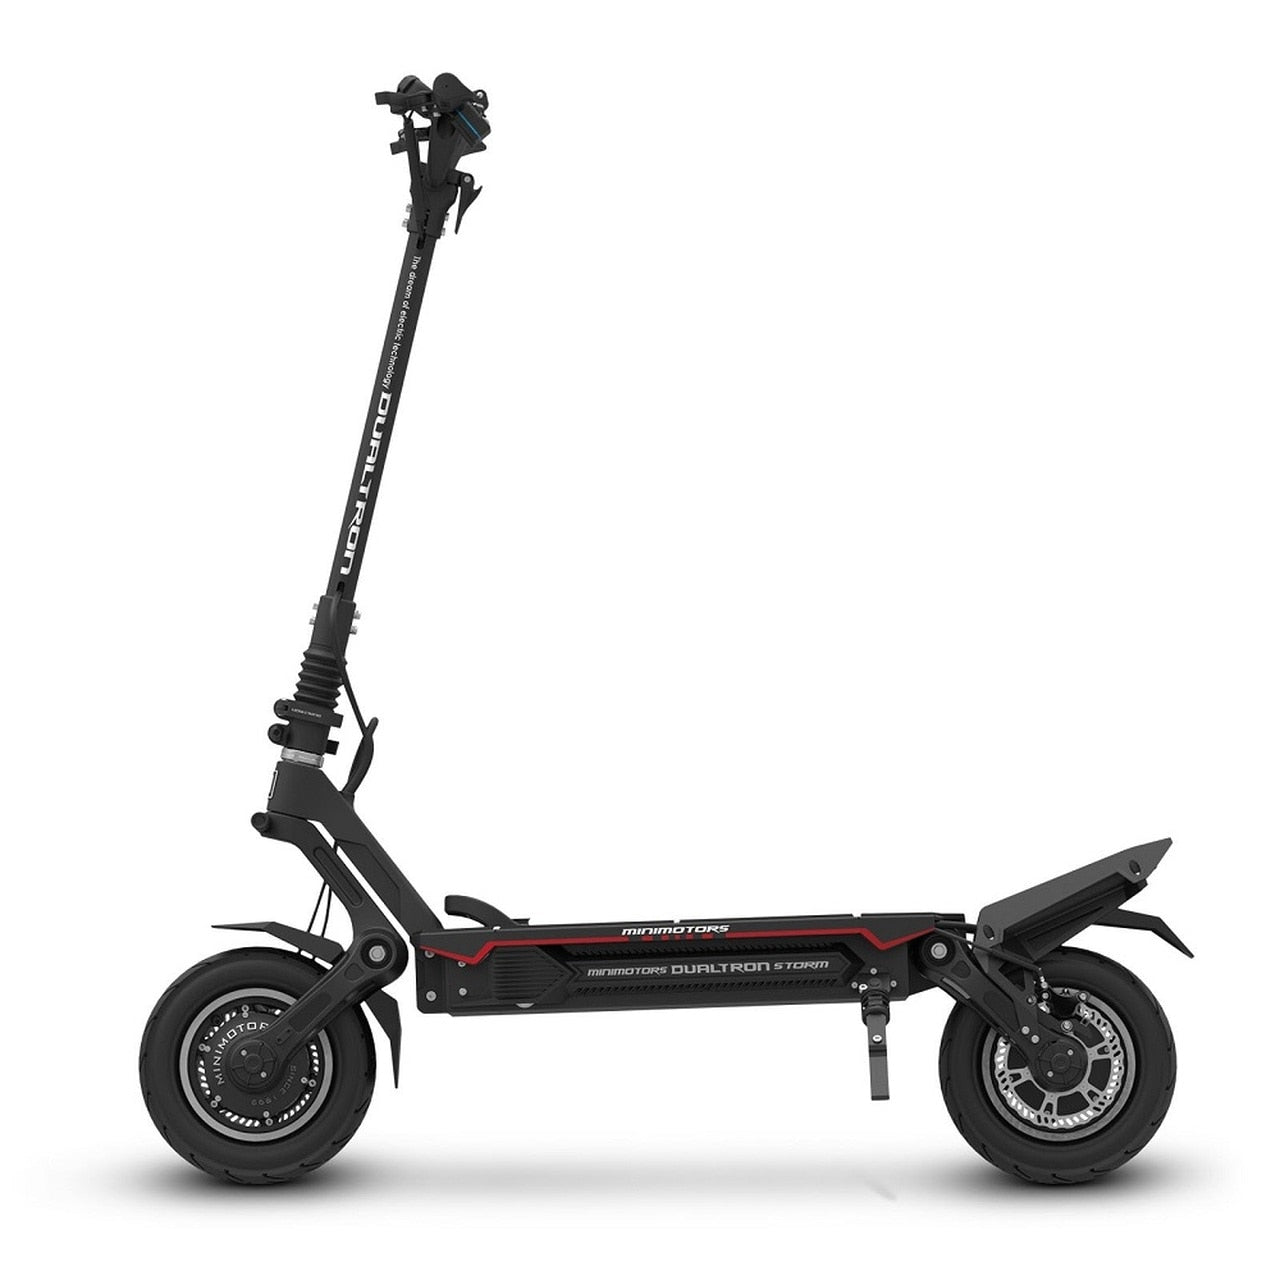 Dualtron Storm - Dual Wheel Drive Electric Scooter - 6640W Max Dual Motor / 2,268Wh Battery